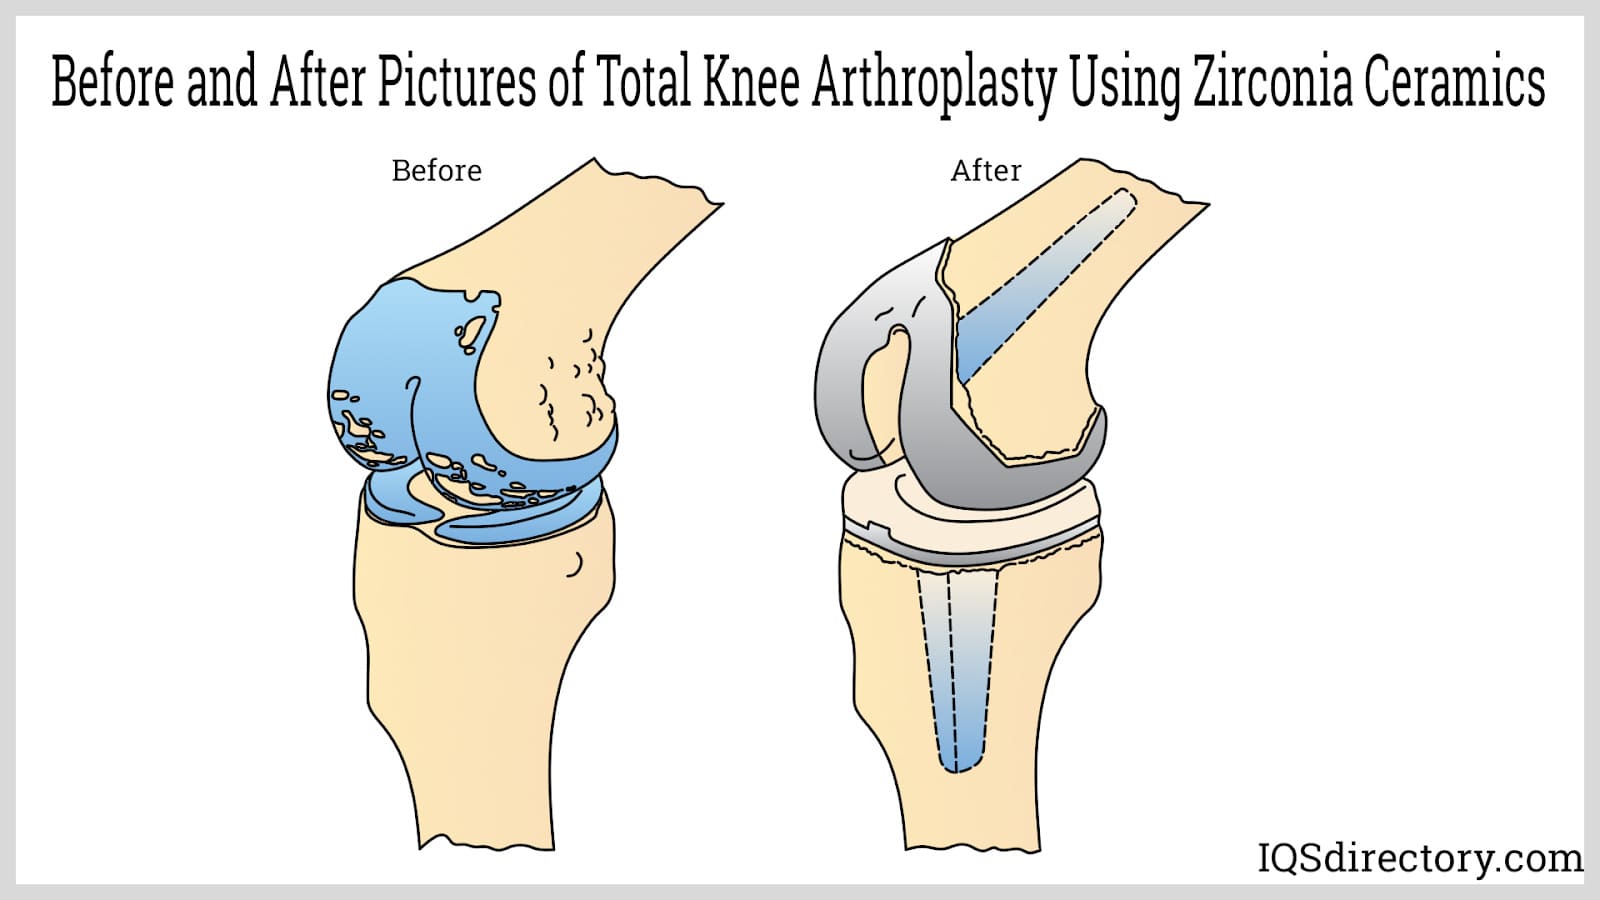 Before and After Pictures of Total Knee Arthroplasty Using Zirconia Ceramics